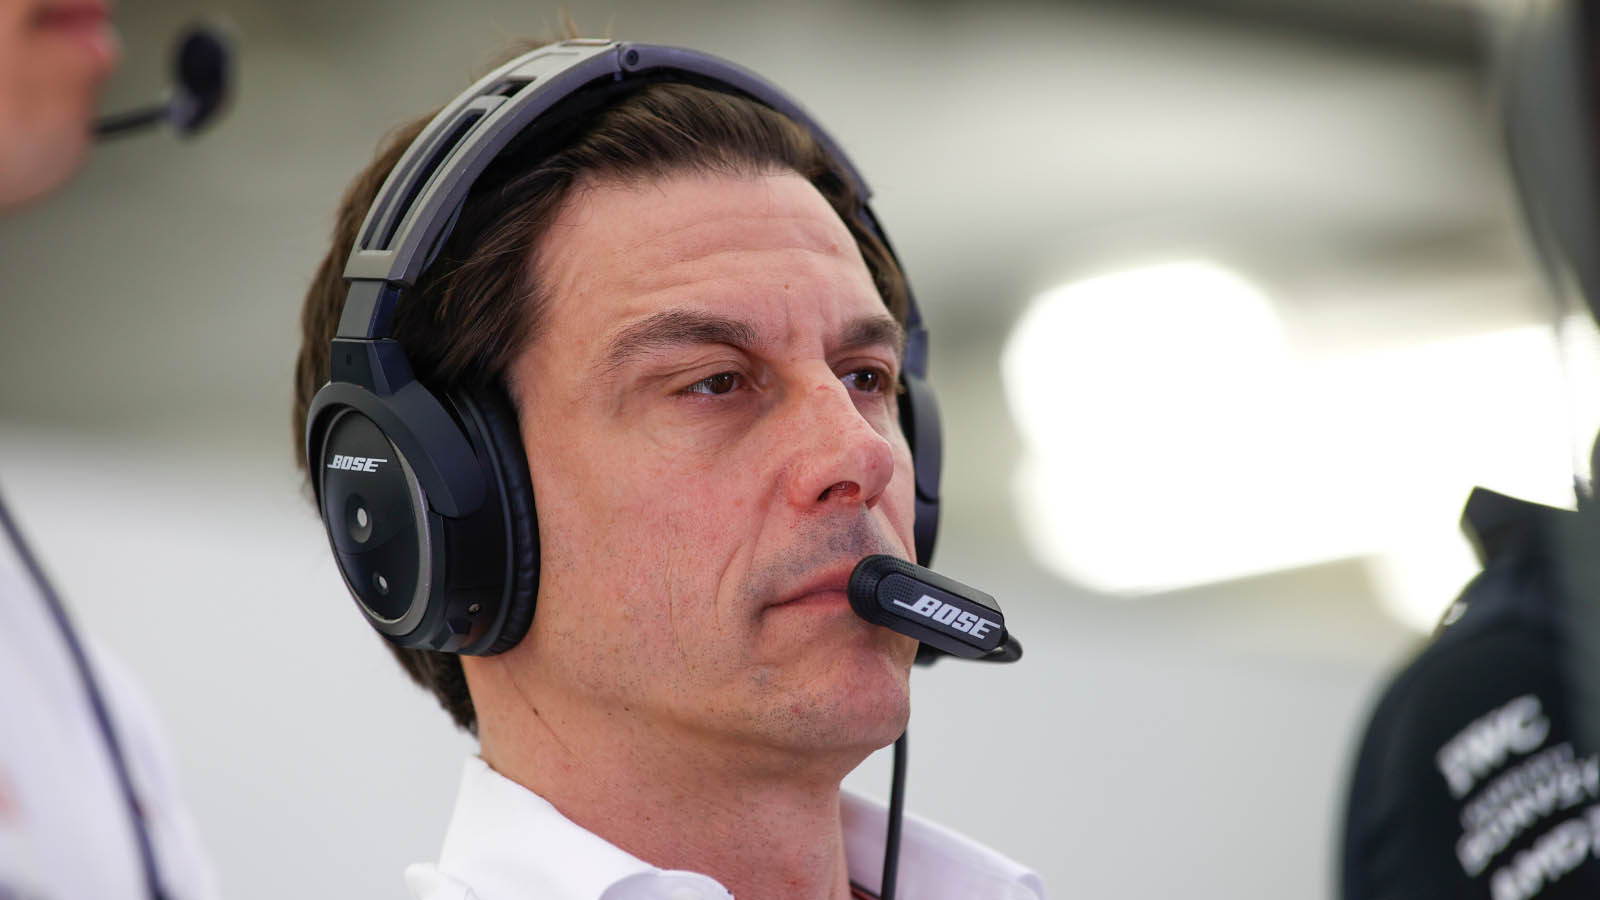 Toto Wolff wears a headset in the garage. Bahrain March 2022.